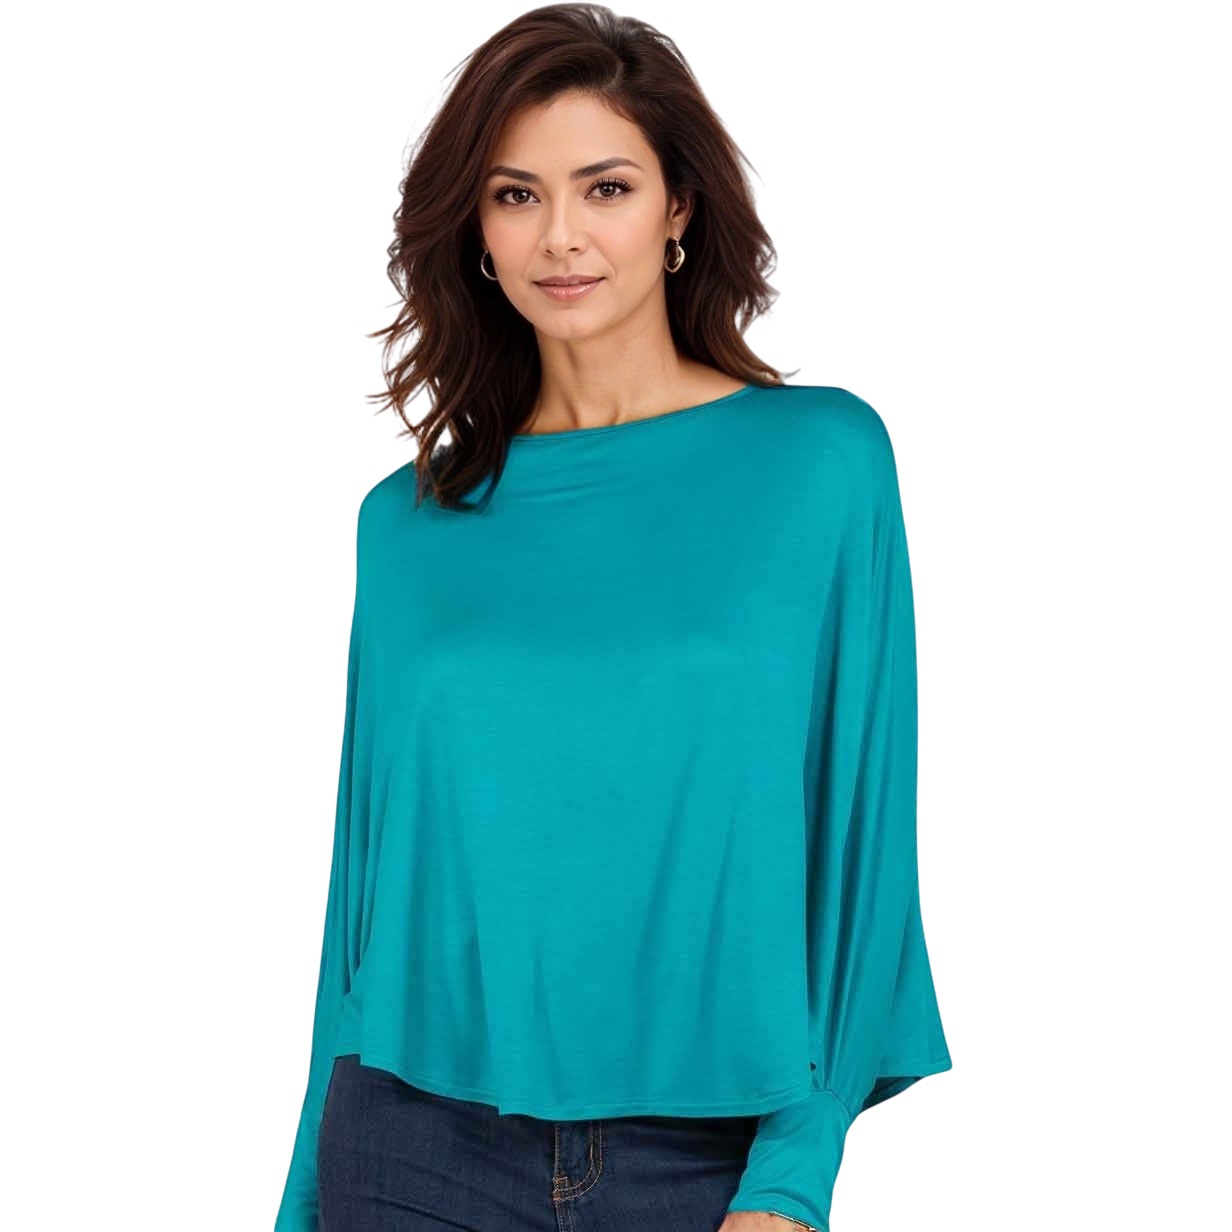 1818 - Teal<br>
Poncho with Sleeves